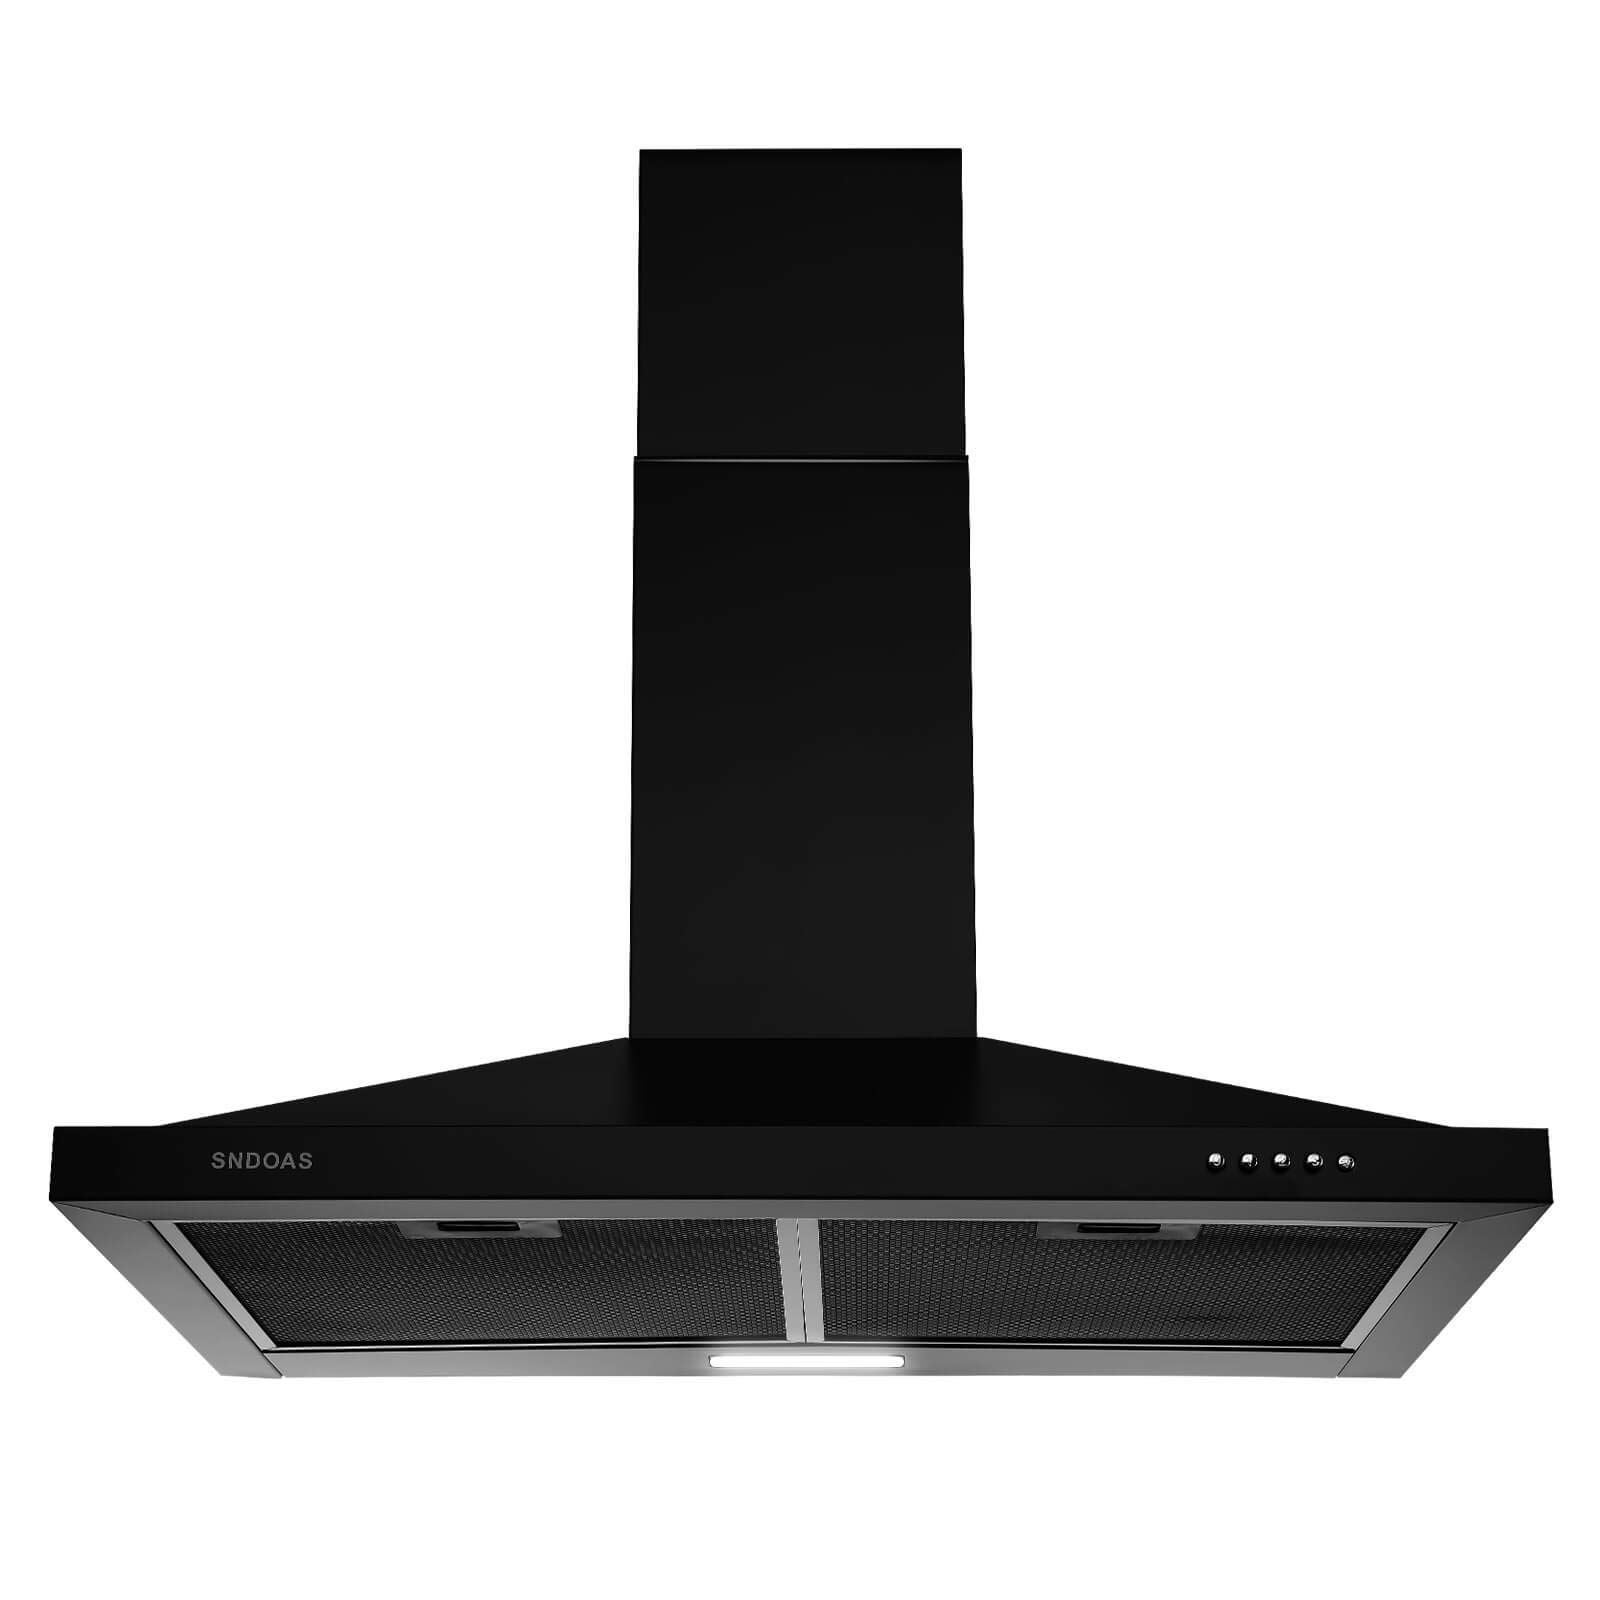 SNDOAS Black Range Hood 30 inches,Vent Hoods in Black Painted Stainless Steel,Wall Mount Range Hood,Kitchen Hood Vent with Ducte